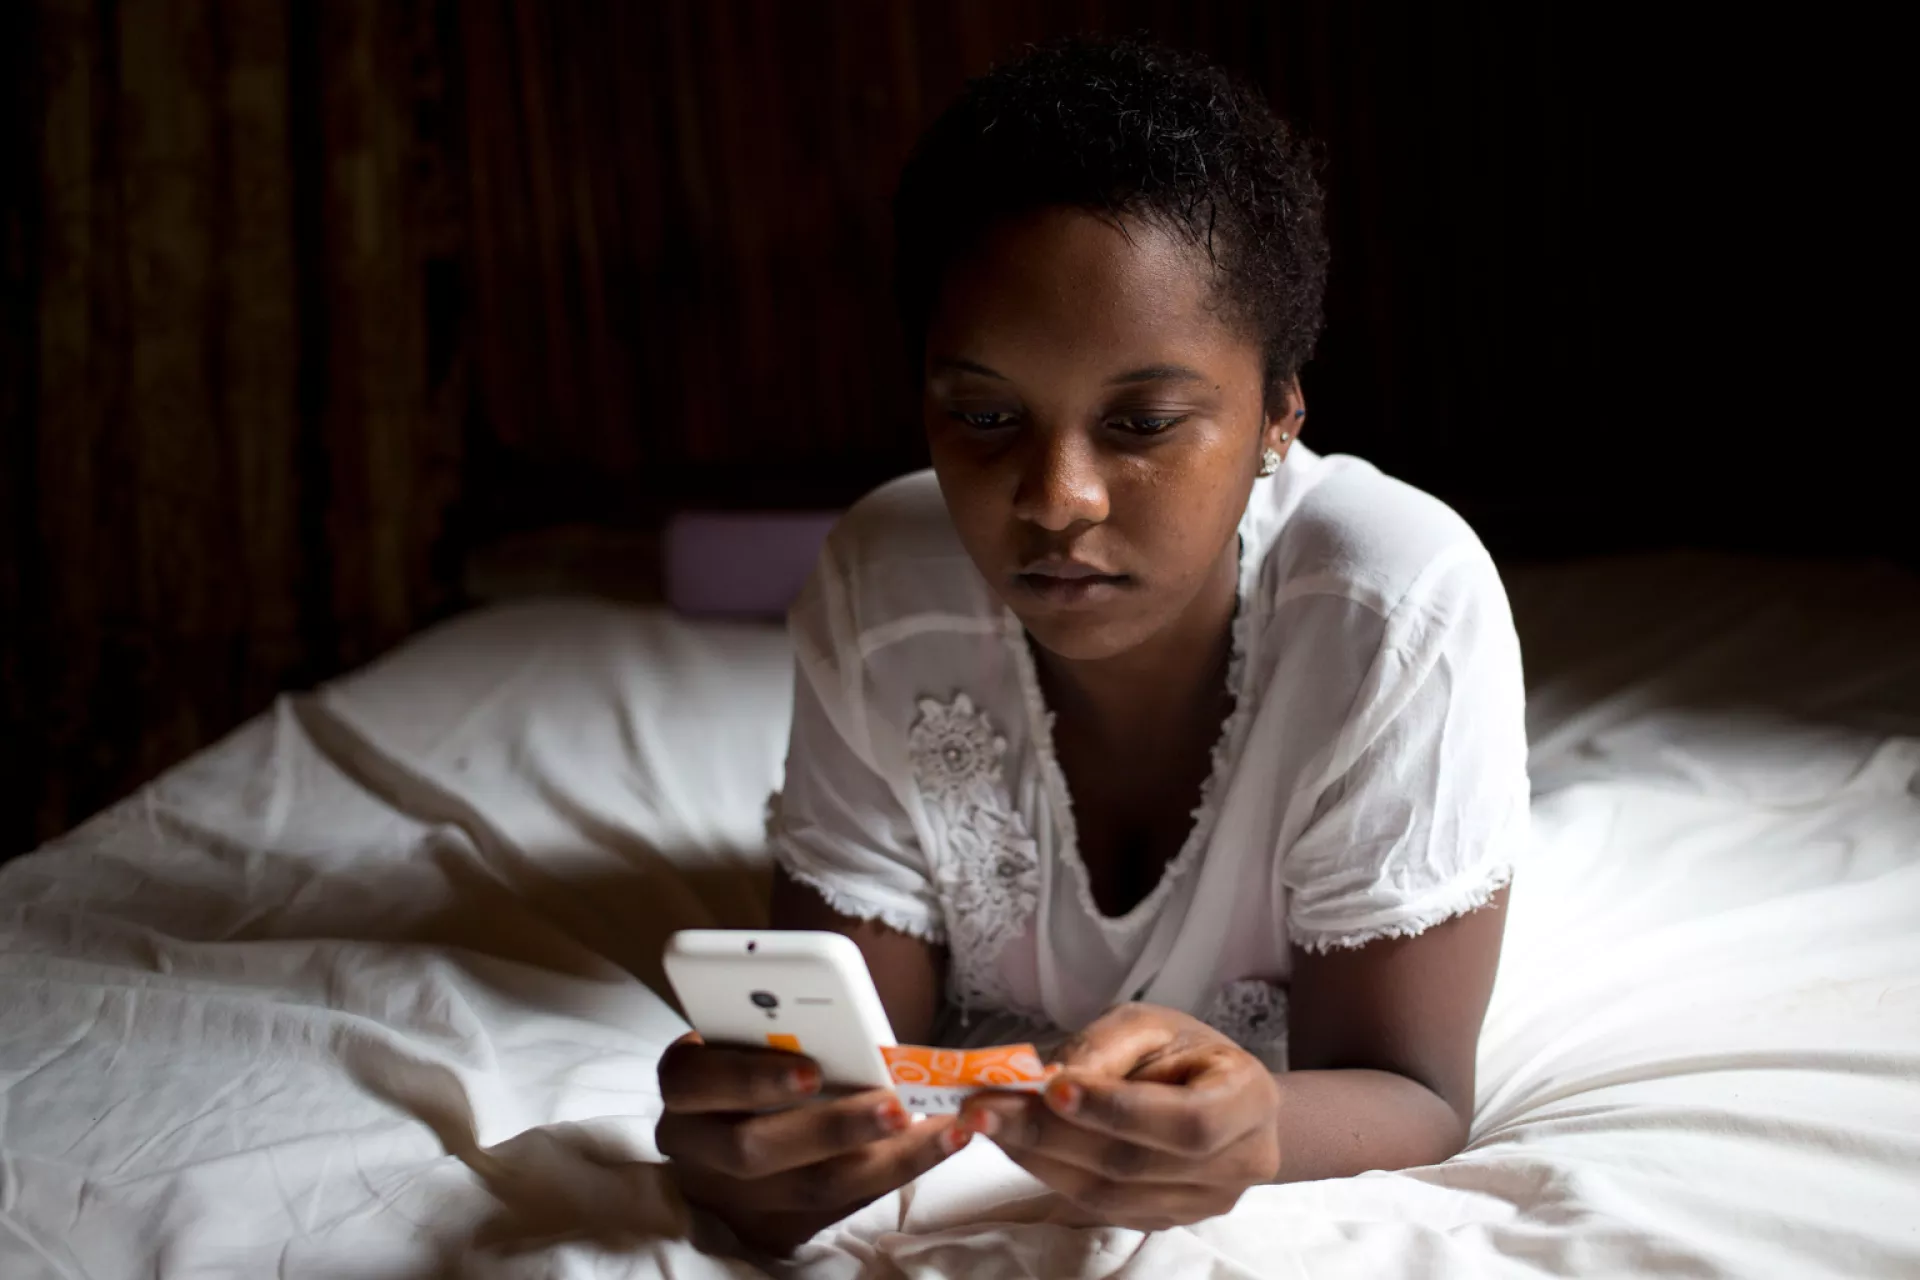 16-year-old Charmela loads credit to her mobile phone, in her home on the island of Nosy Be, off the northwest coast of Madagascar.